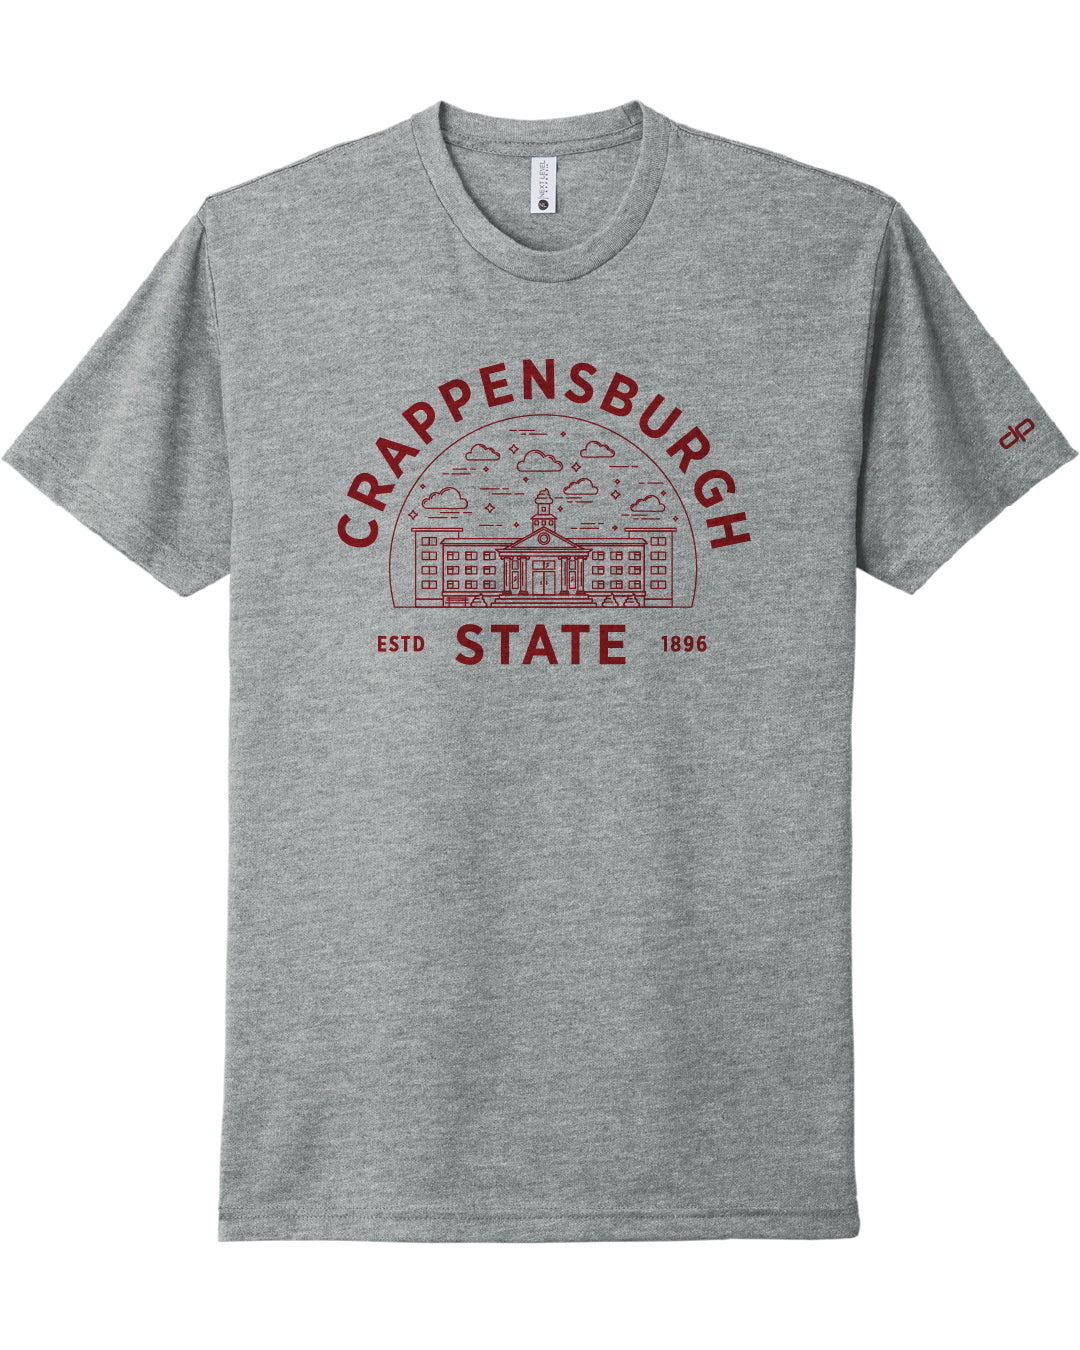 Crappensburgh State T-Shirt